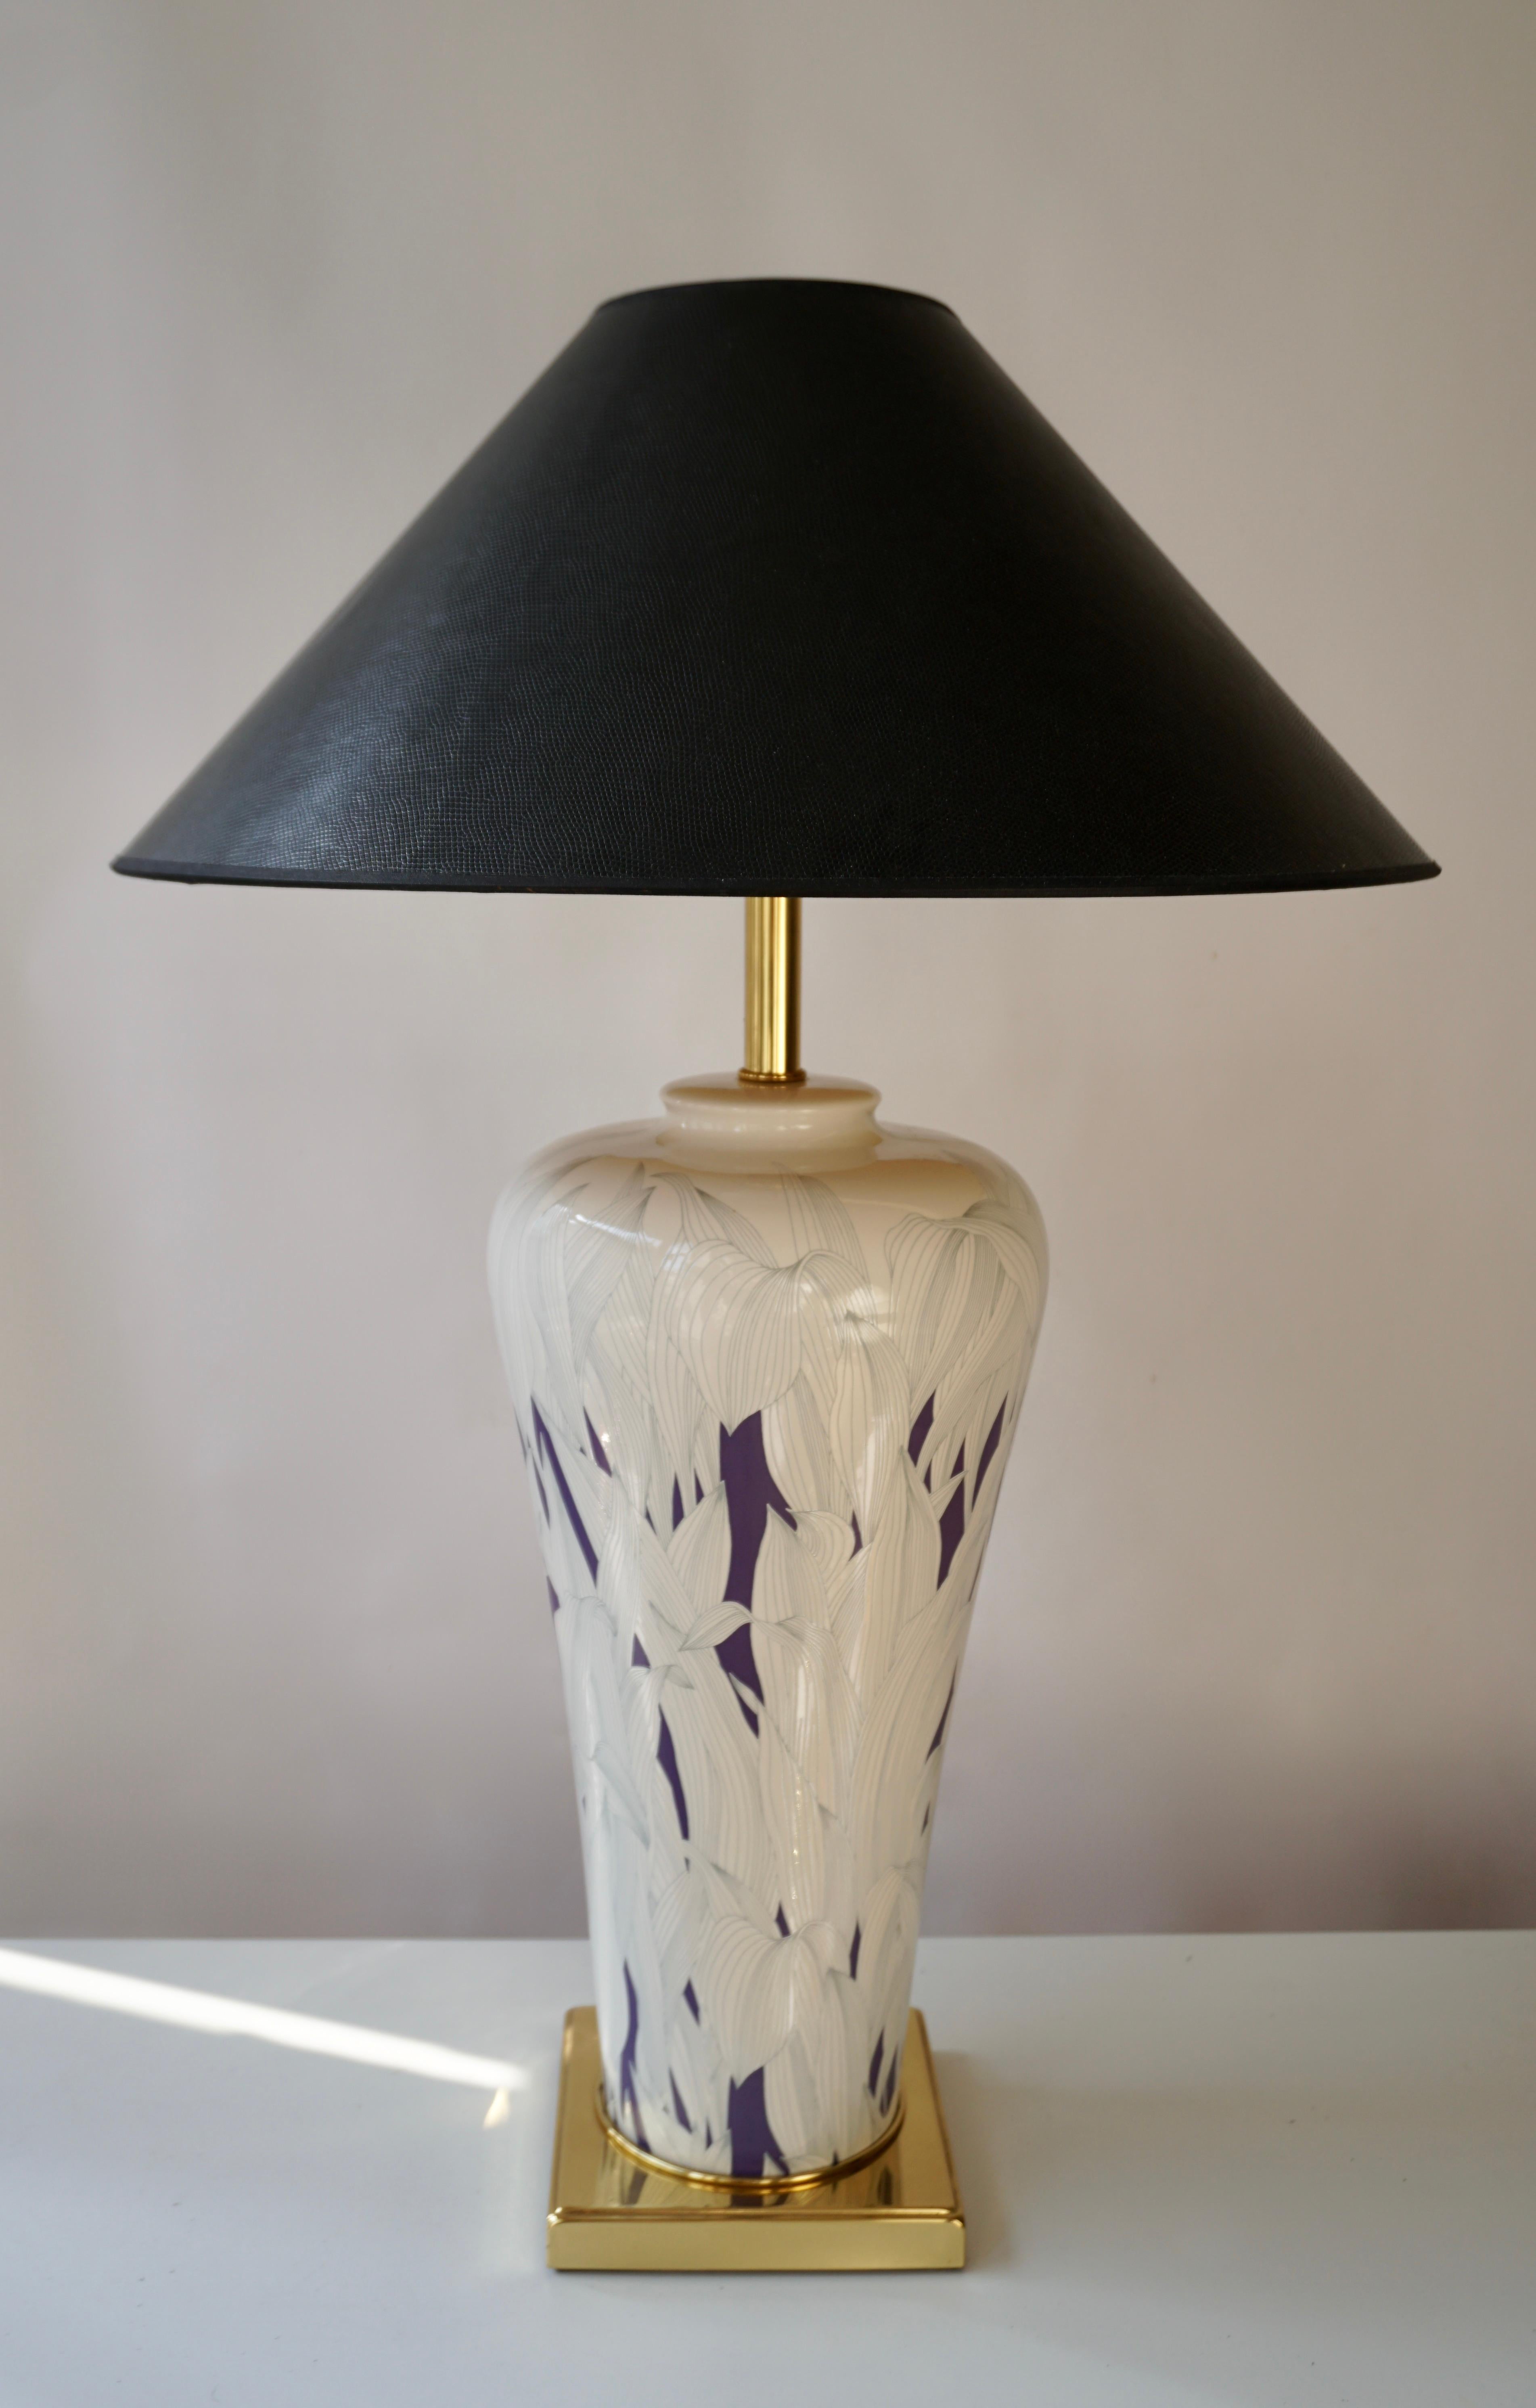 Large Italian purple and white ceramic and brass table lamp.
Measures ceramic base: Height 51 cm.
Diameter 24 cm.
Weight 4 kg.

The lampshade is not included in the price.